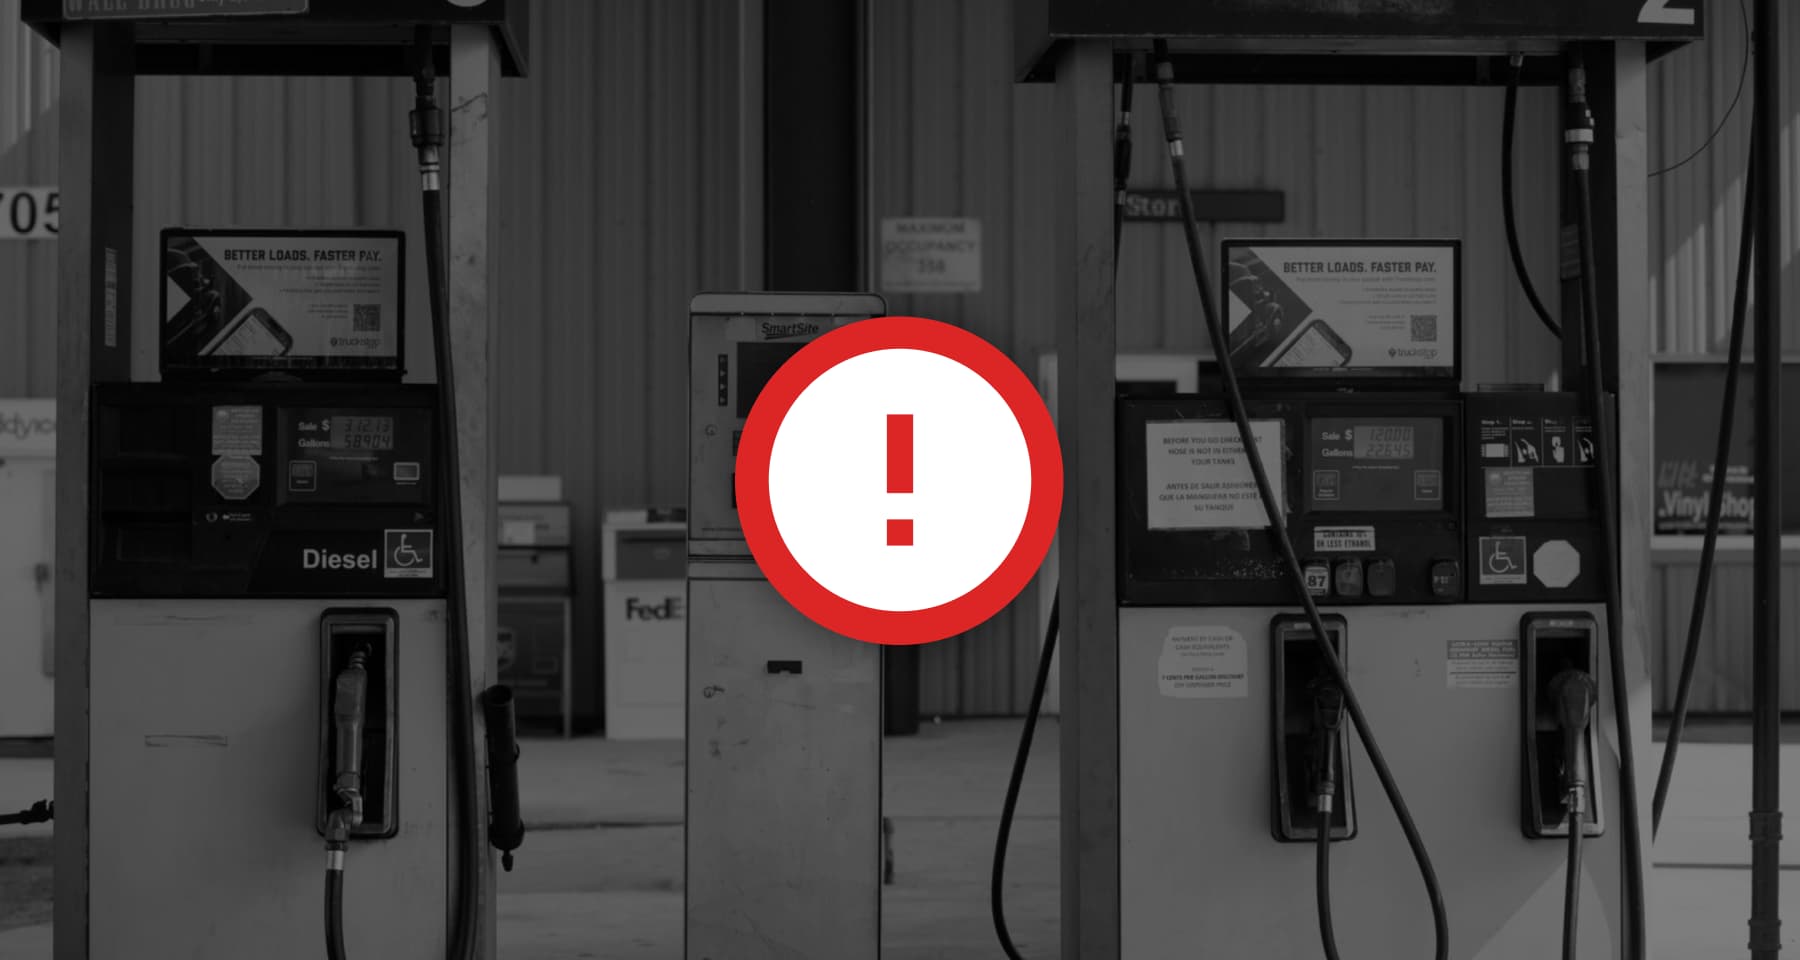 background image of diesel pumps at a truck stop with a red exclamation mark in foreground